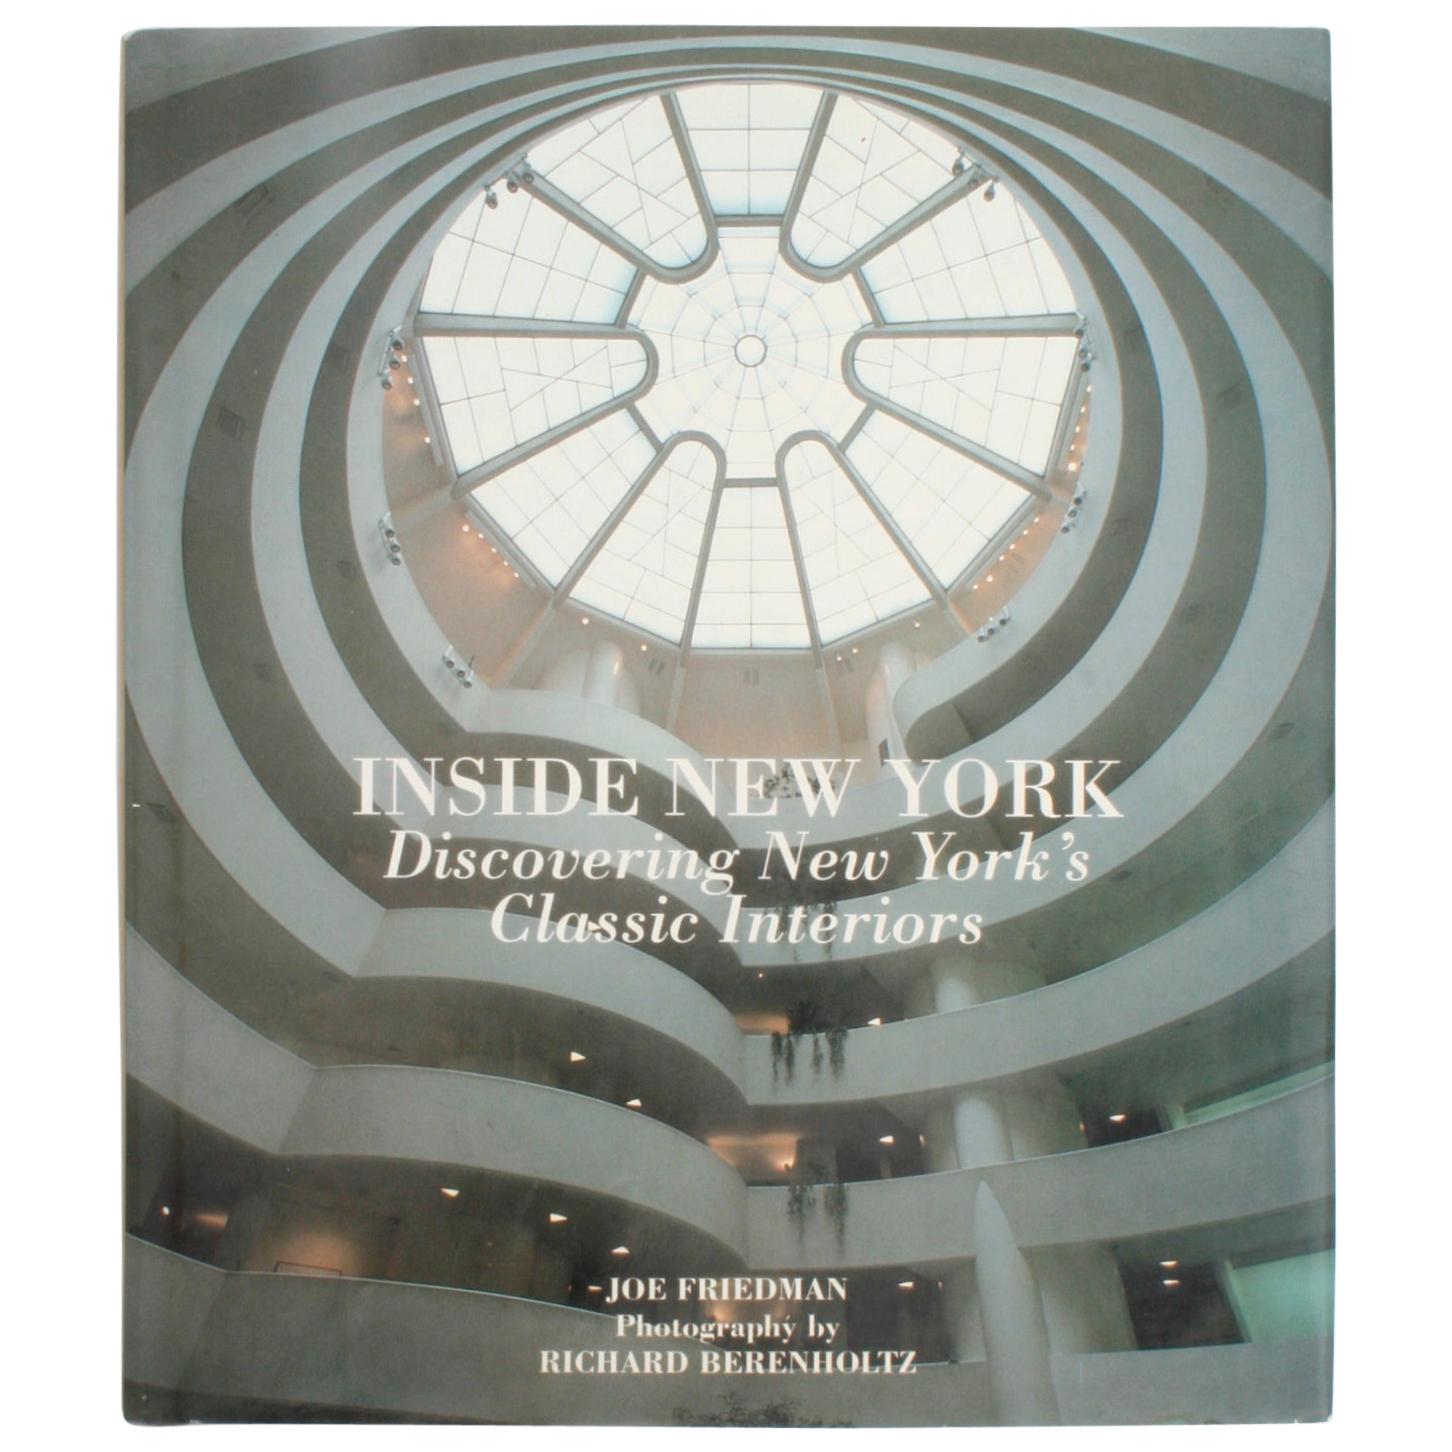 Inside New York, Discovering New York's Classic Interiors, First Edition